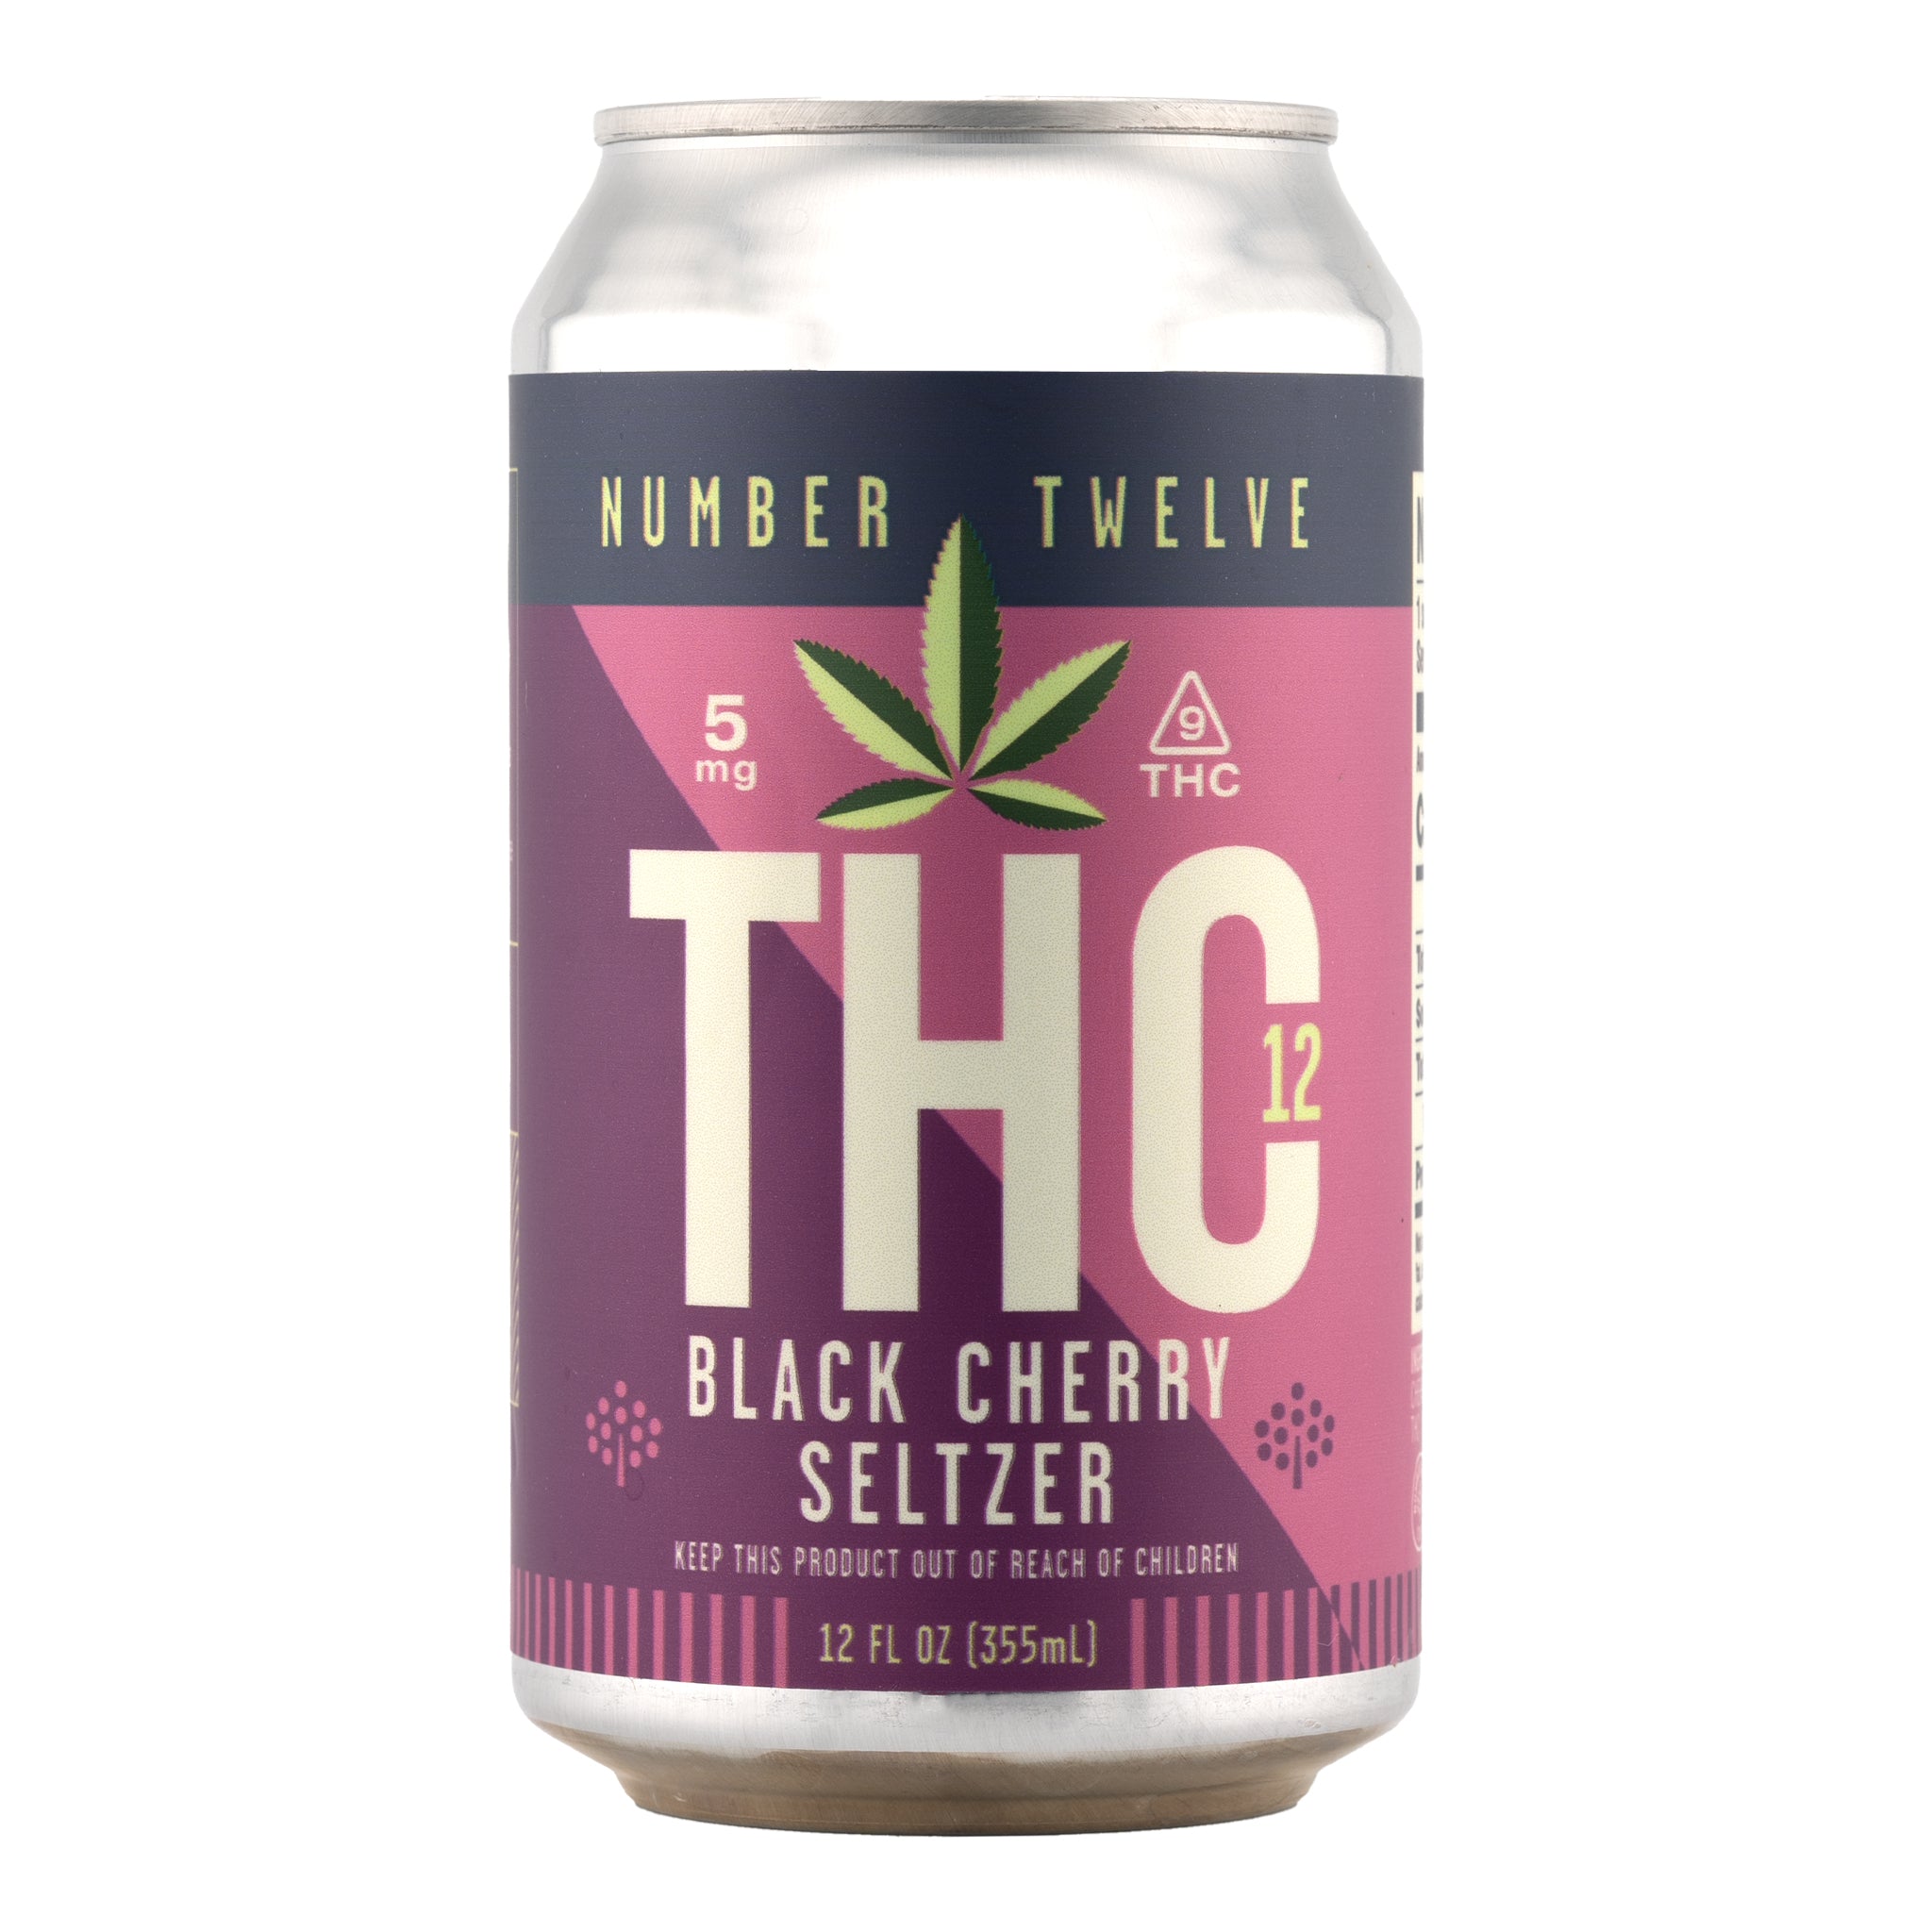 NUMBER 12 Seltzer 5mg THC